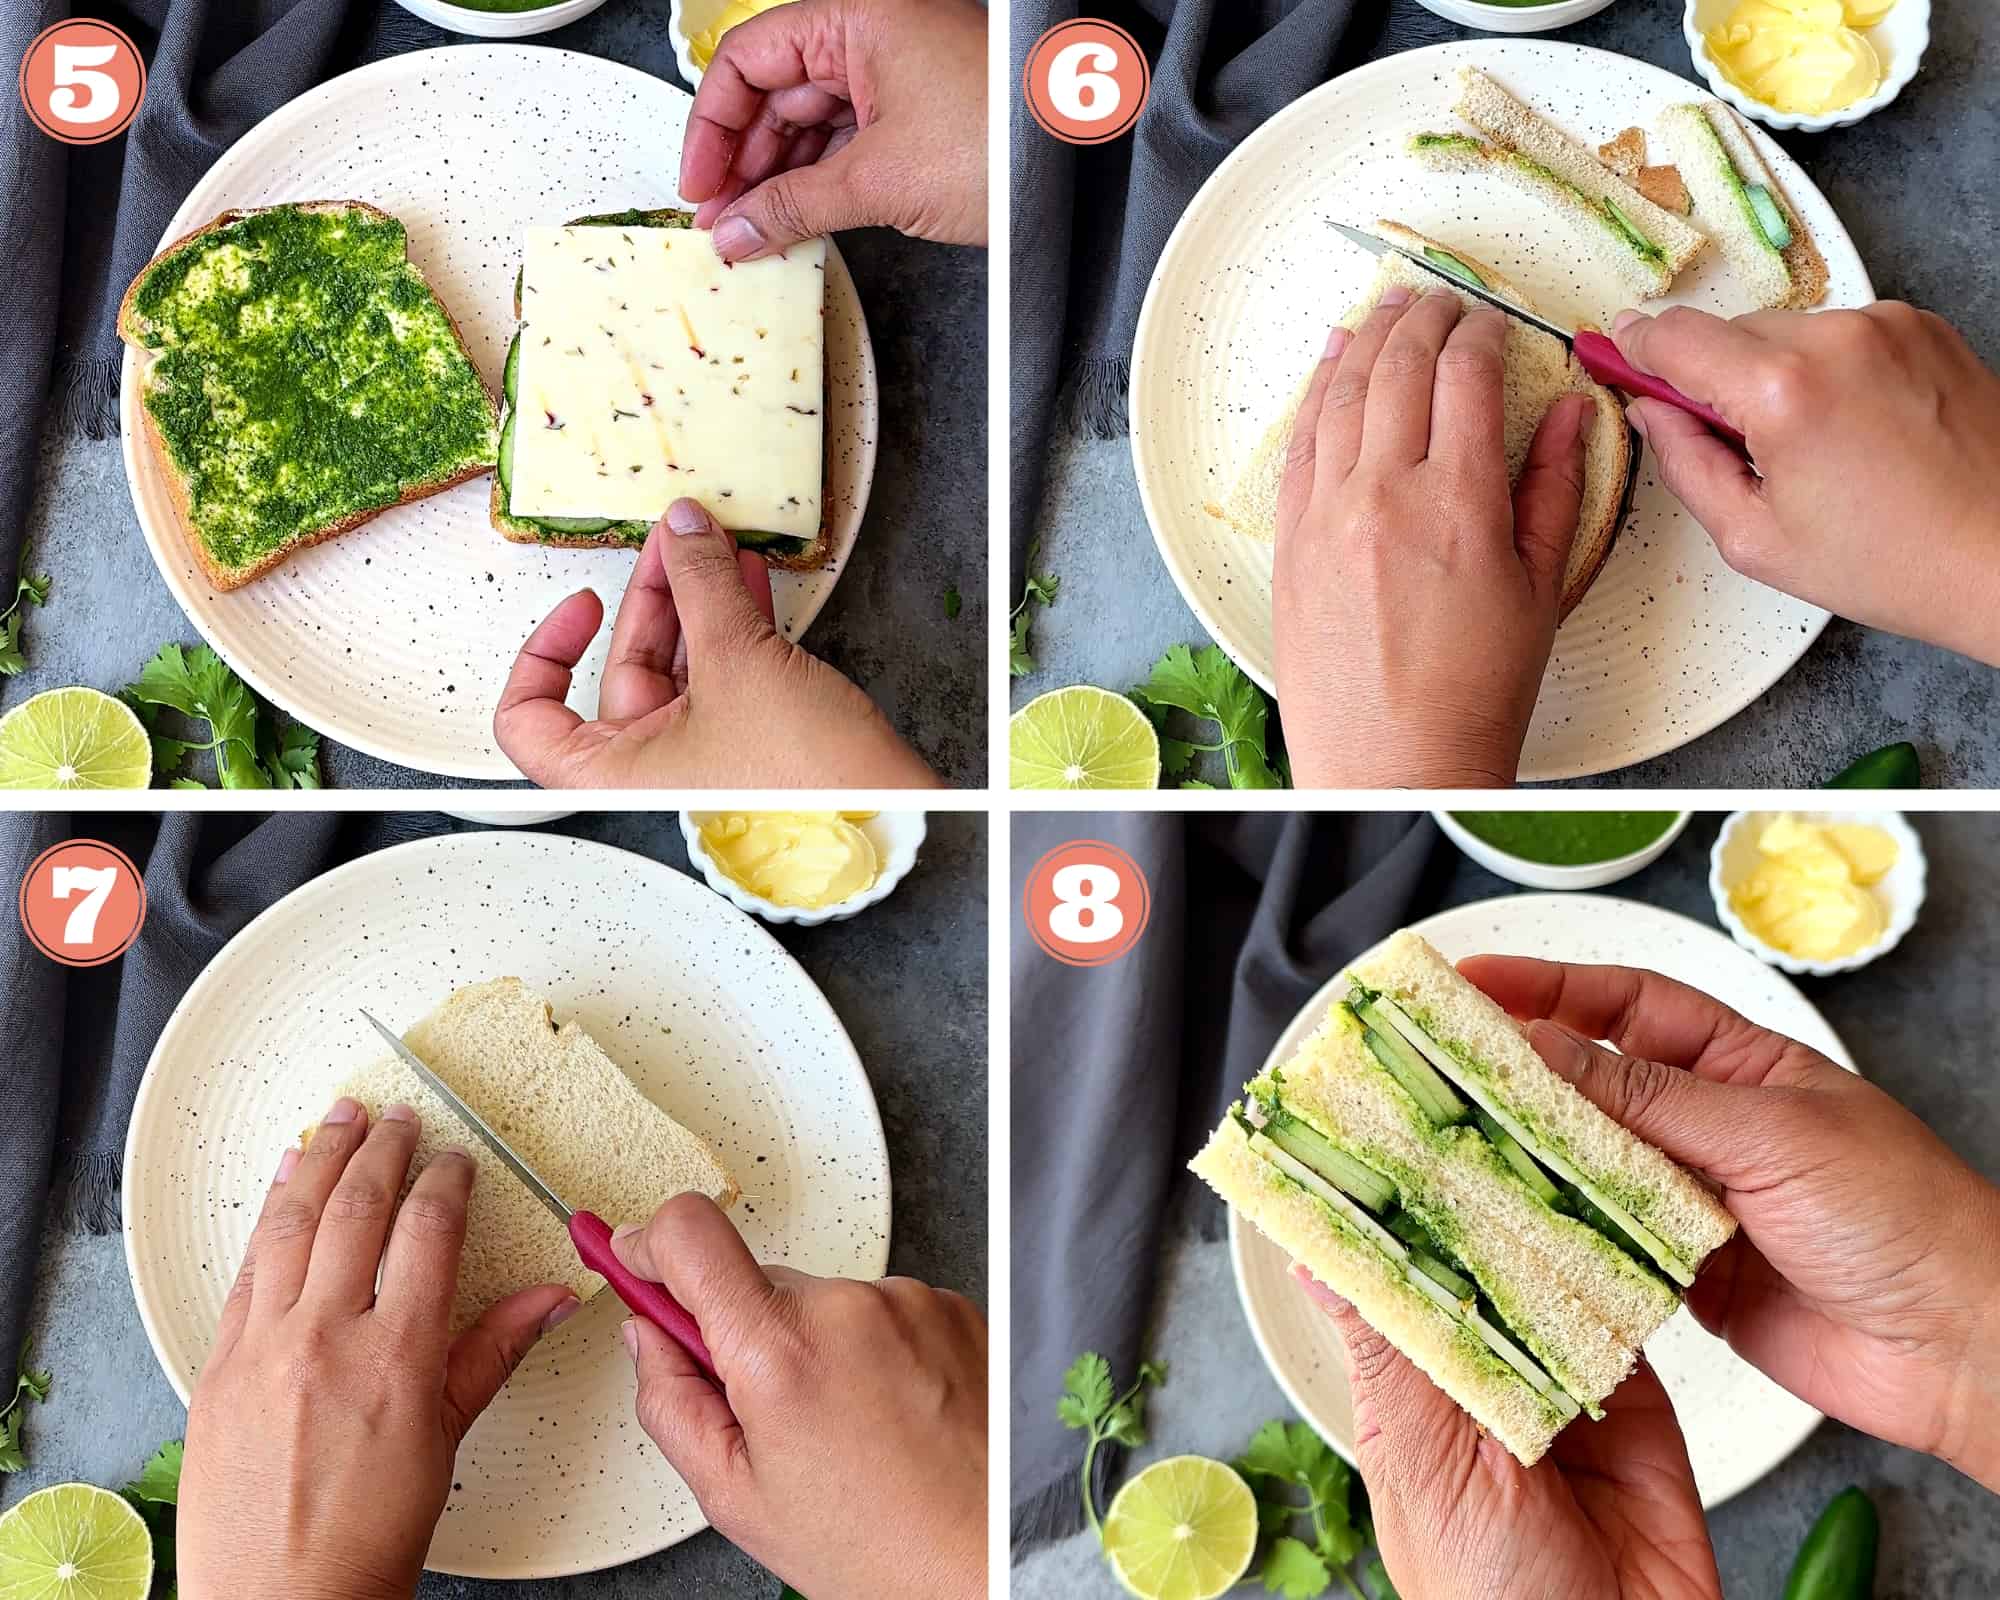 Steps 5 to 8 showing how to assemble chutney sandwich with cheese and slice it.